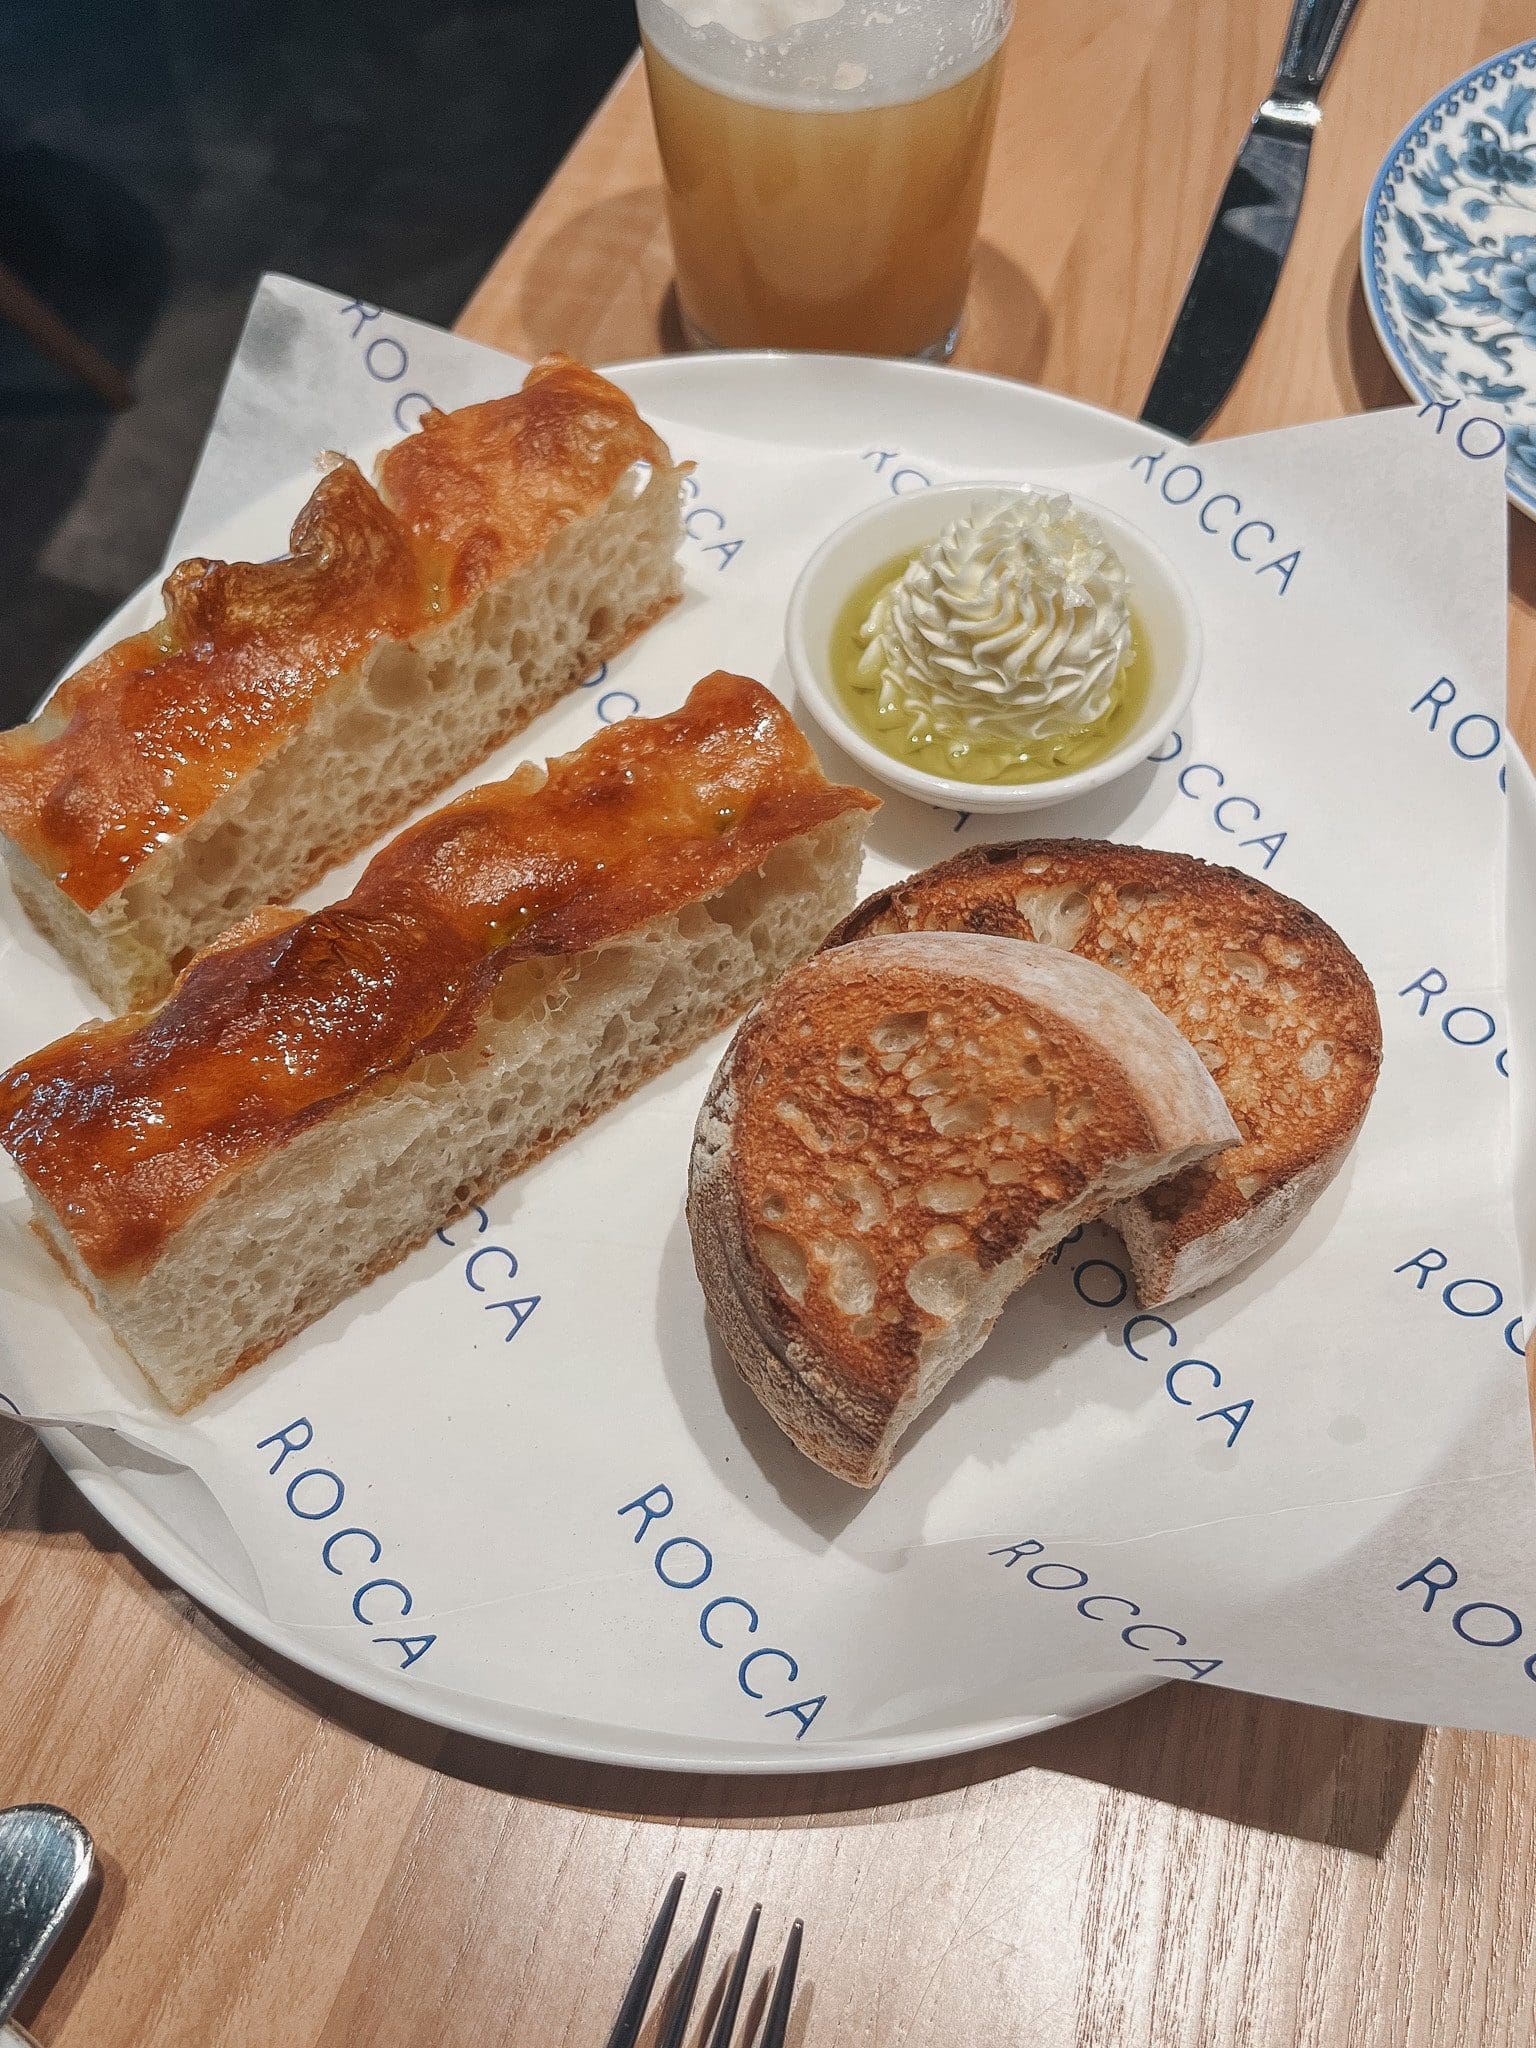 Bread appetizer from Rocca